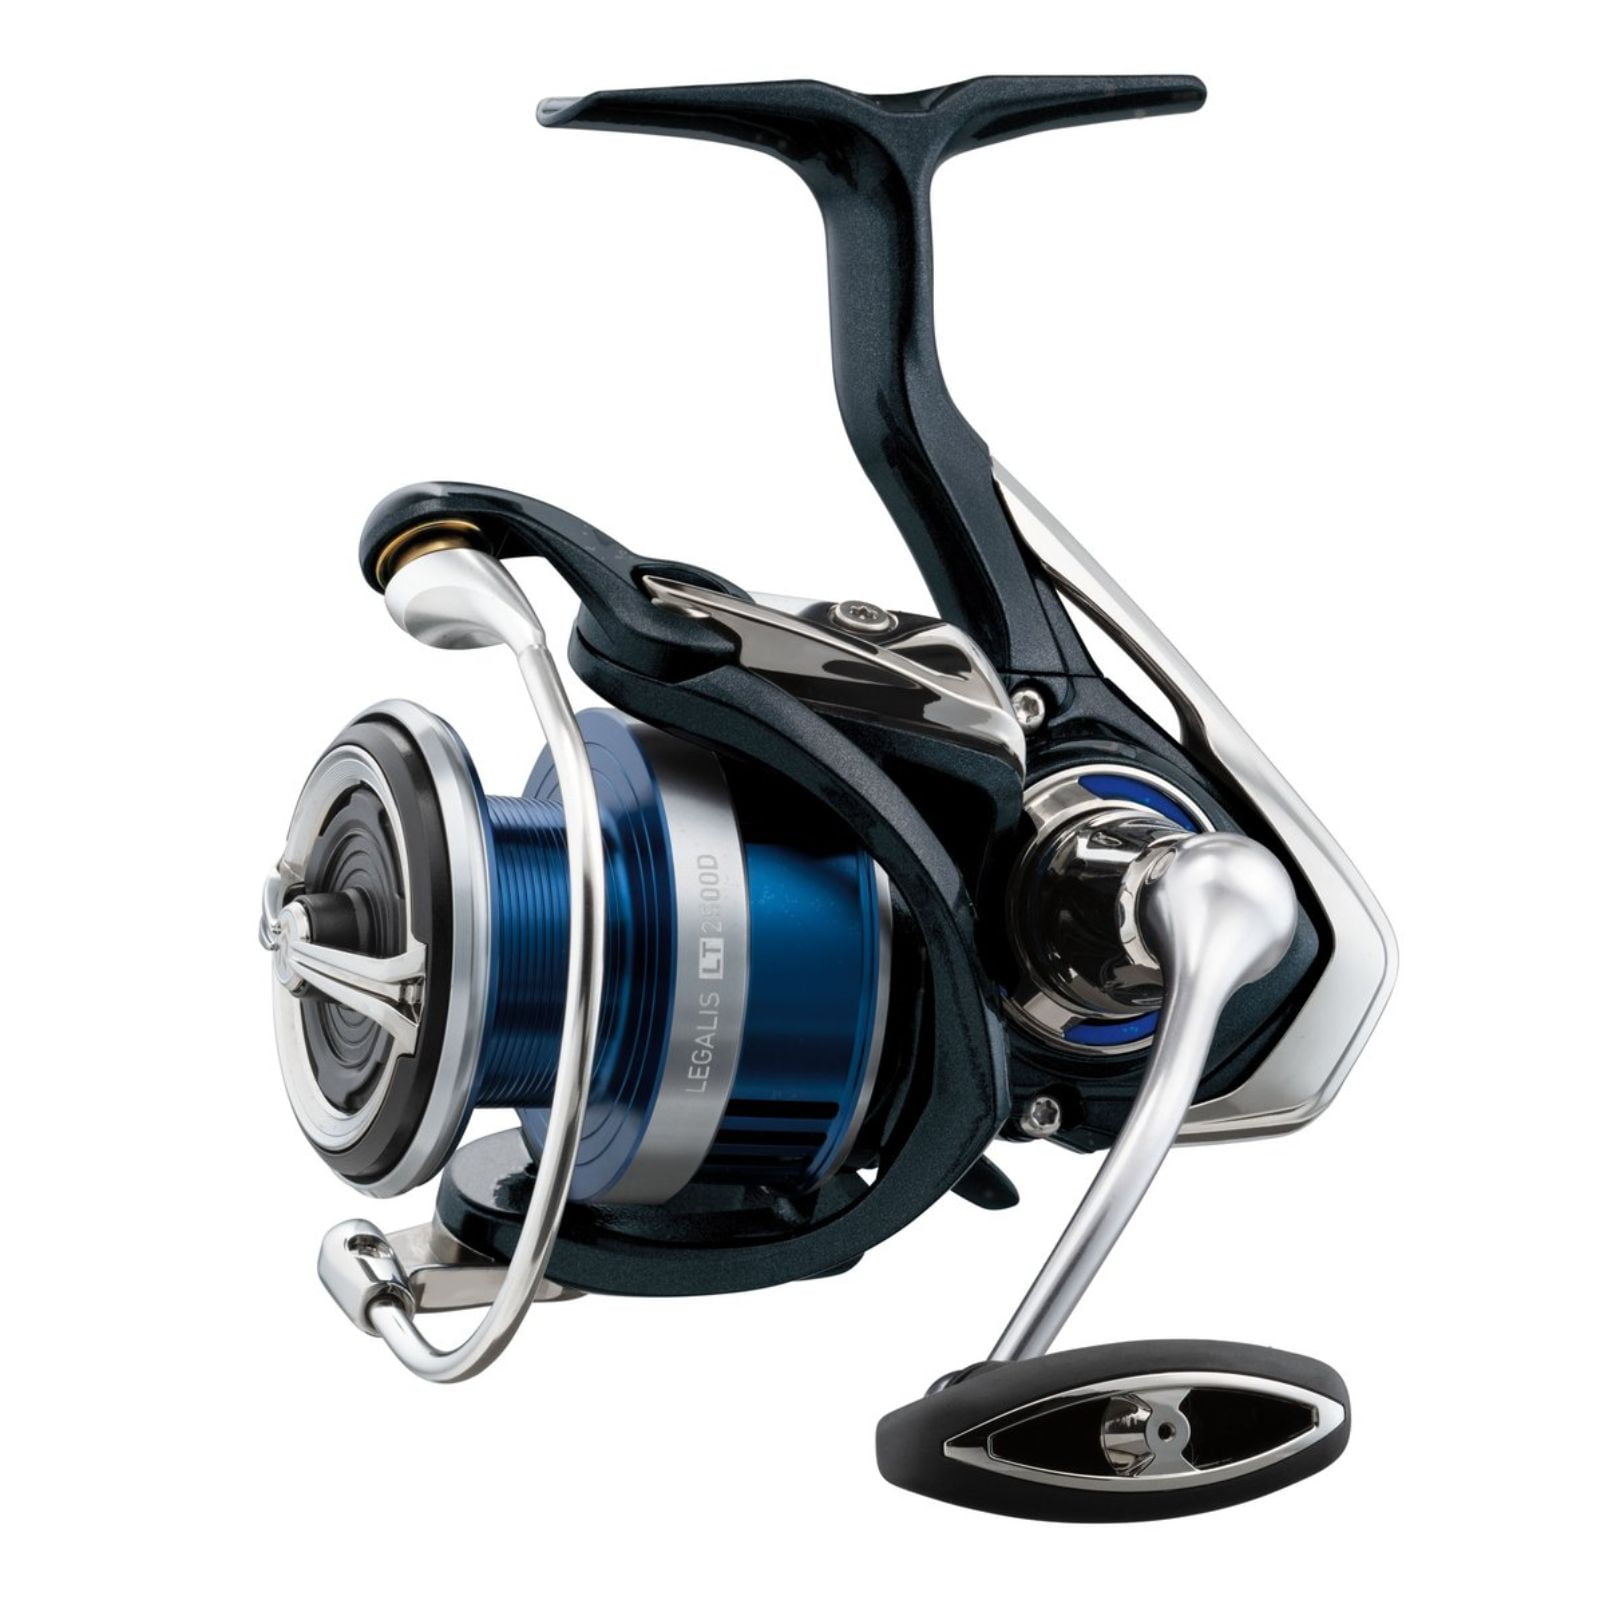 Daiwa 17 Legalis 5000D Reel *Brand New* Free Delivery 